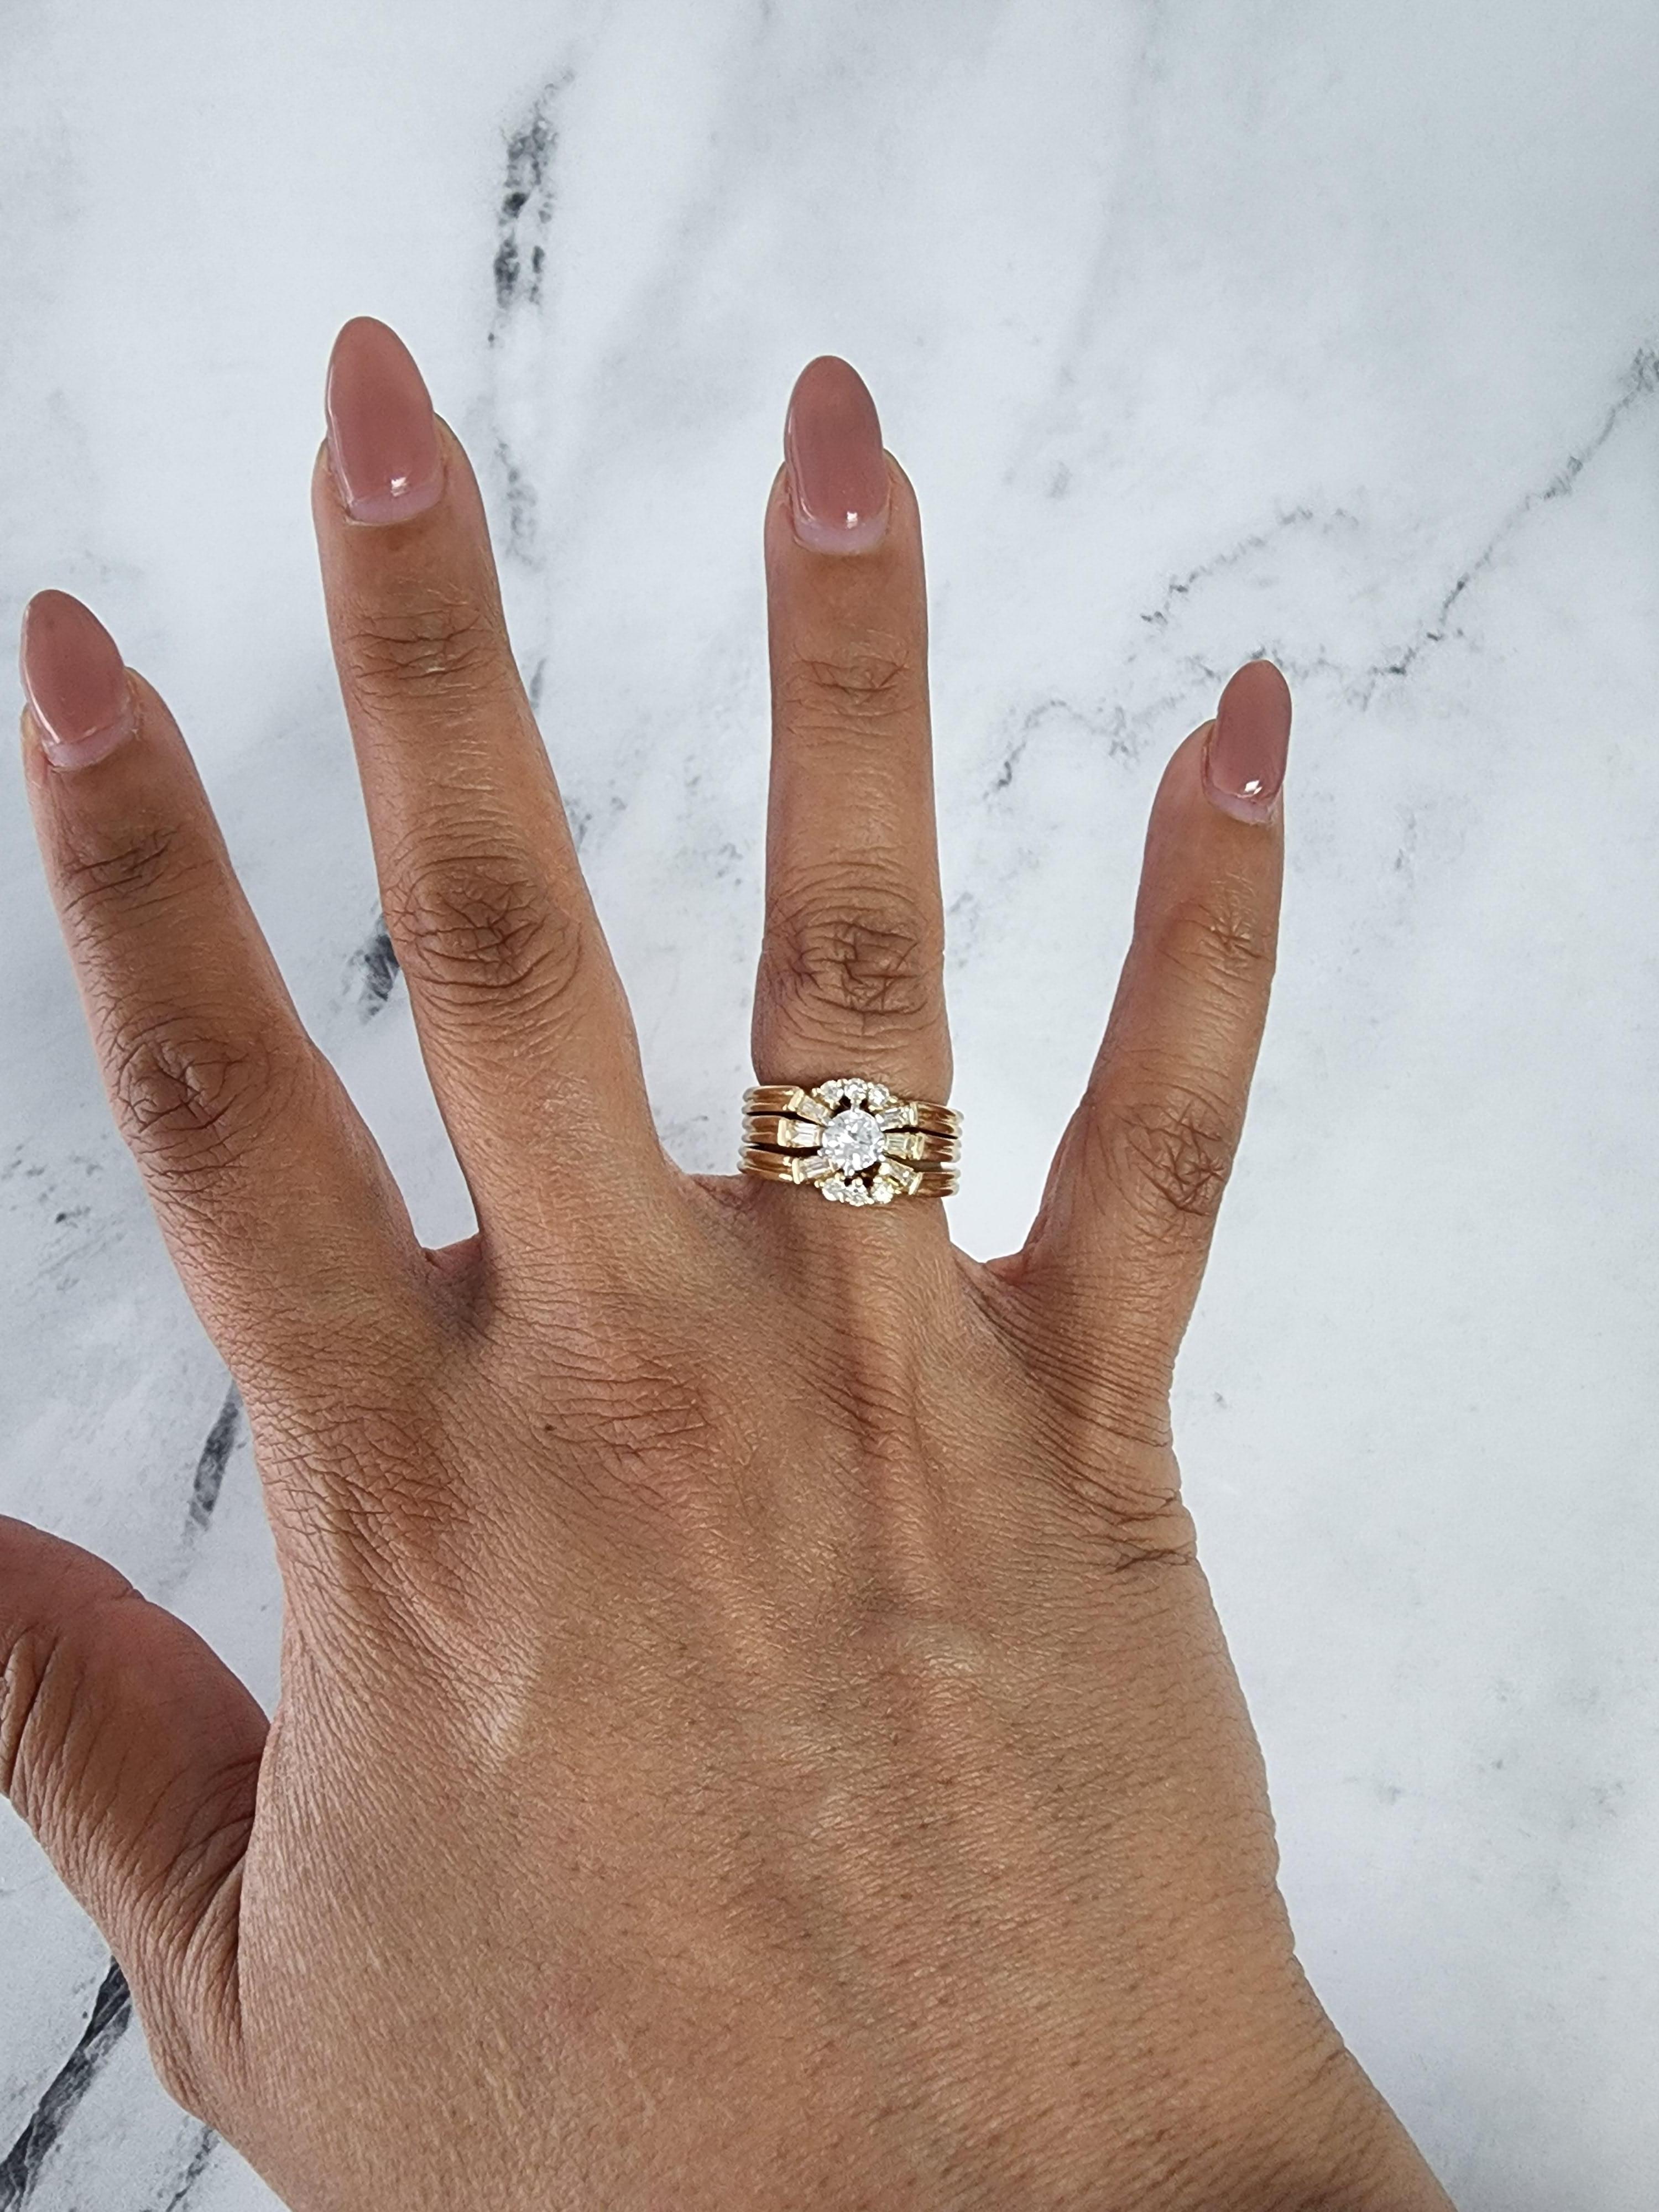 ♥ Ring Summary ♥

Main Stone: Diamond
Approx. Carat Weight: 1.33cttw
Diamond Color: G - I
Diamond Clarity: SI2
Stone Cut: Baguette & Round
Band Material: 14k Yellow Gold
Dimension Height: 12MM
**Three Rings